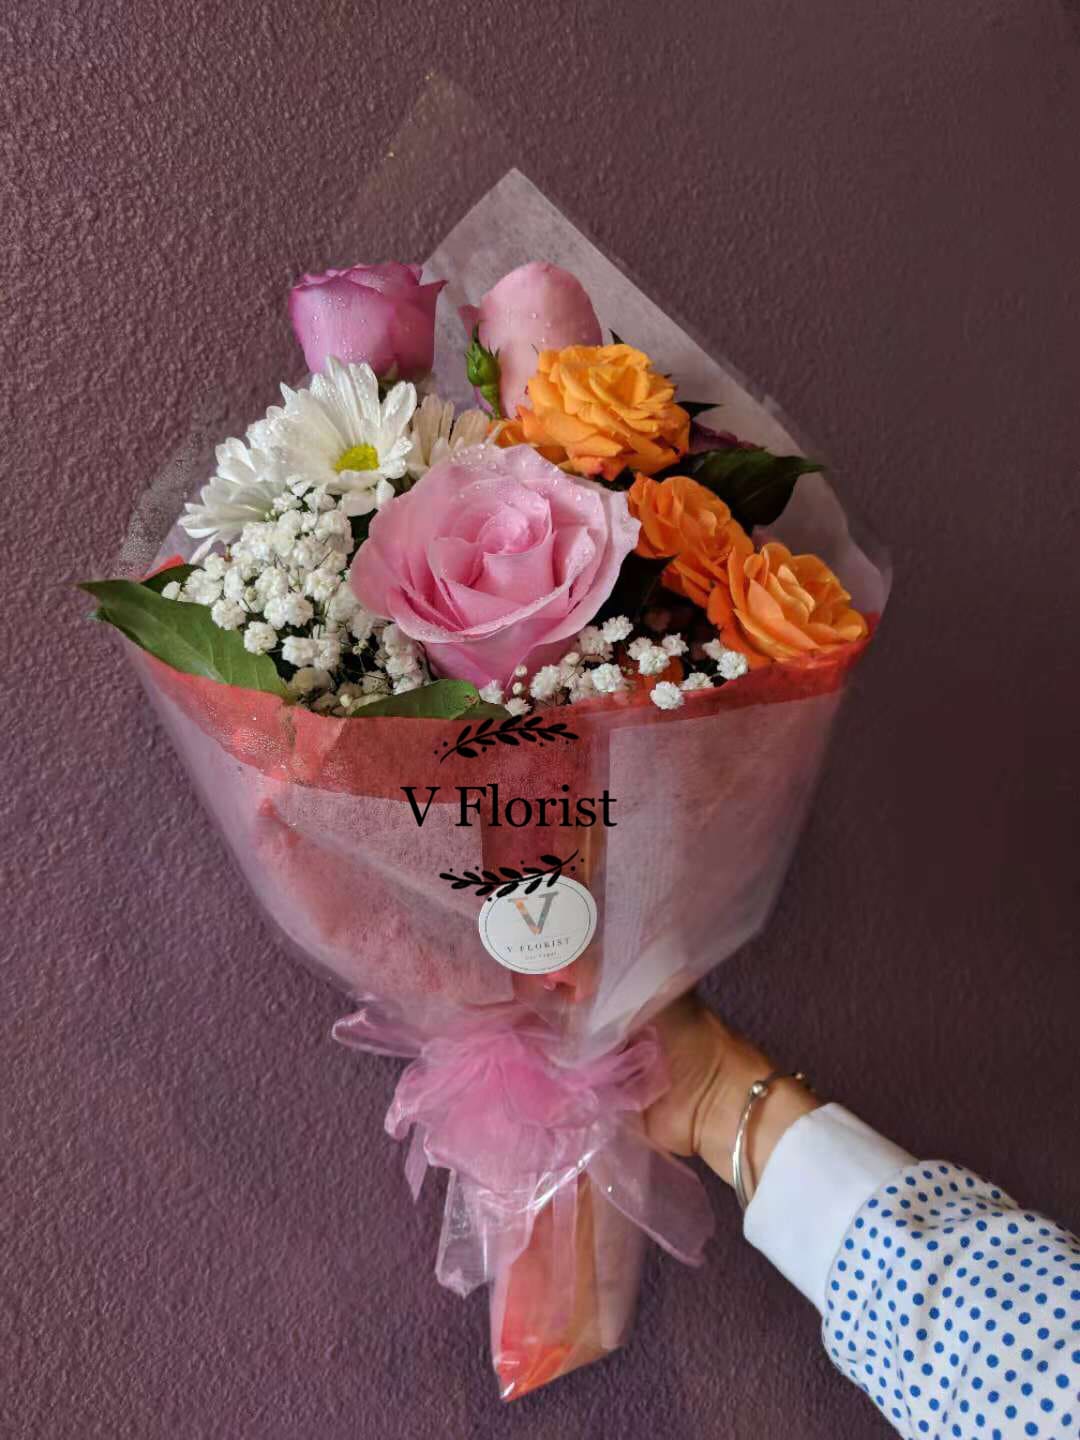 Delightful Roses and Daisy Bouquet by V Florist